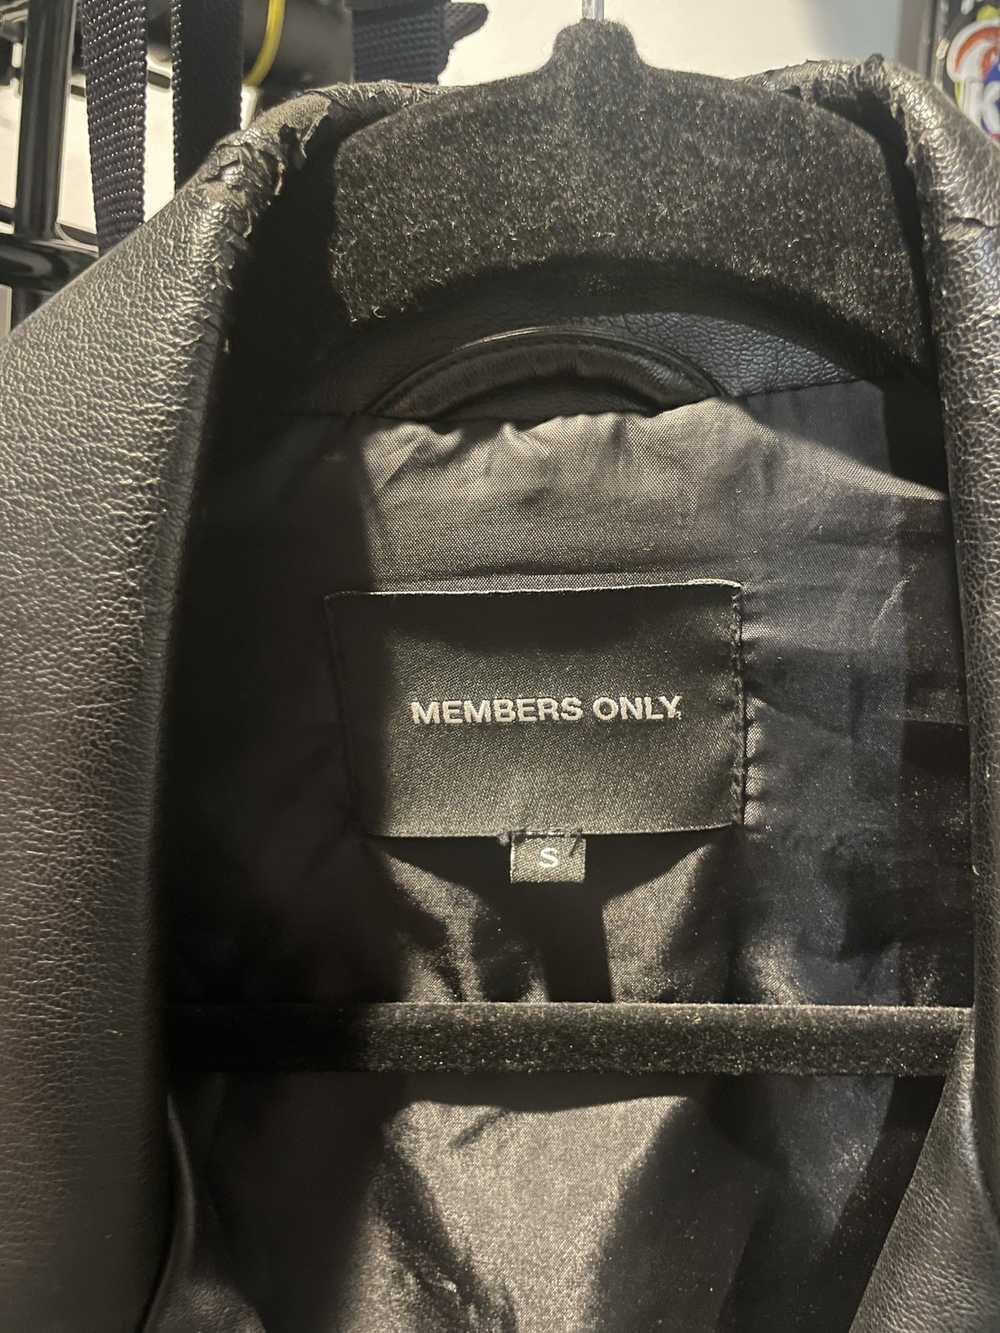 Members Only Members Only - image 2